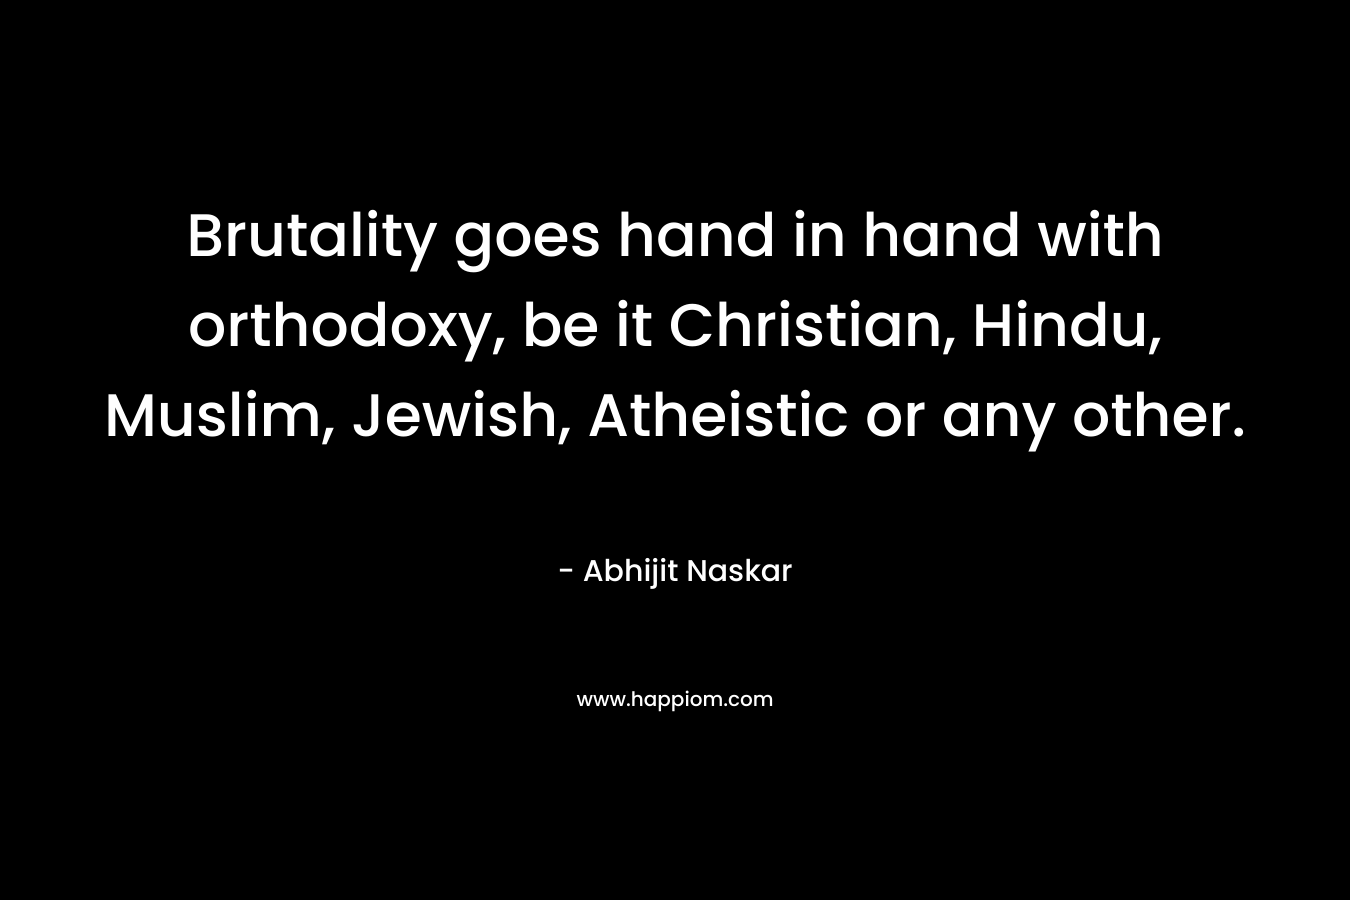 Brutality goes hand in hand with orthodoxy, be it Christian, Hindu, Muslim, Jewish, Atheistic or any other.